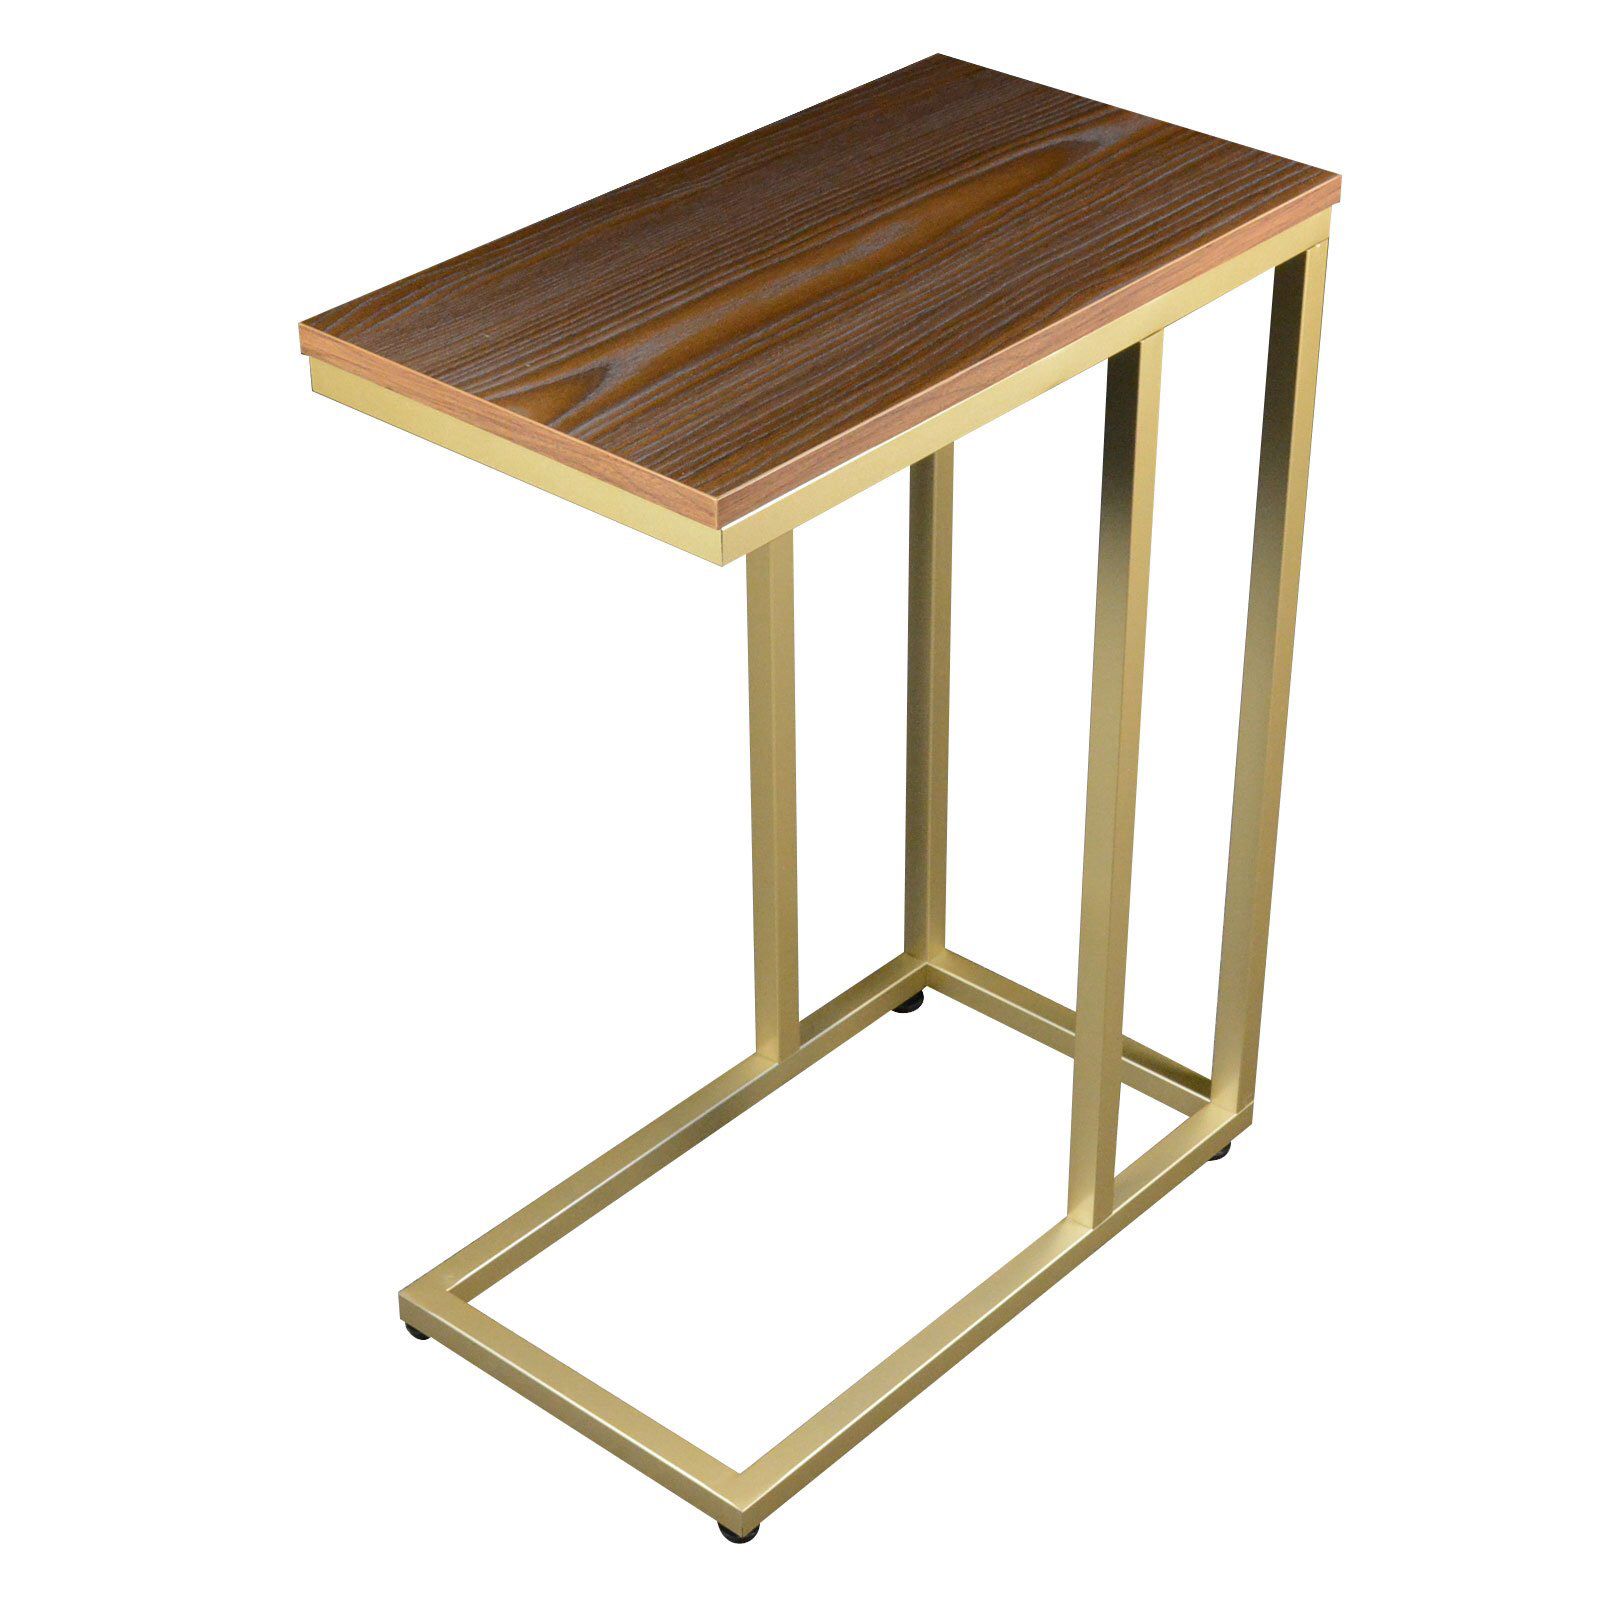 🎁 BRAND NEW The Stephanie C Table/End Table/Laptop Stand, Oak Wood Finish Top/Champagne Gold Base with Adjustable Glides